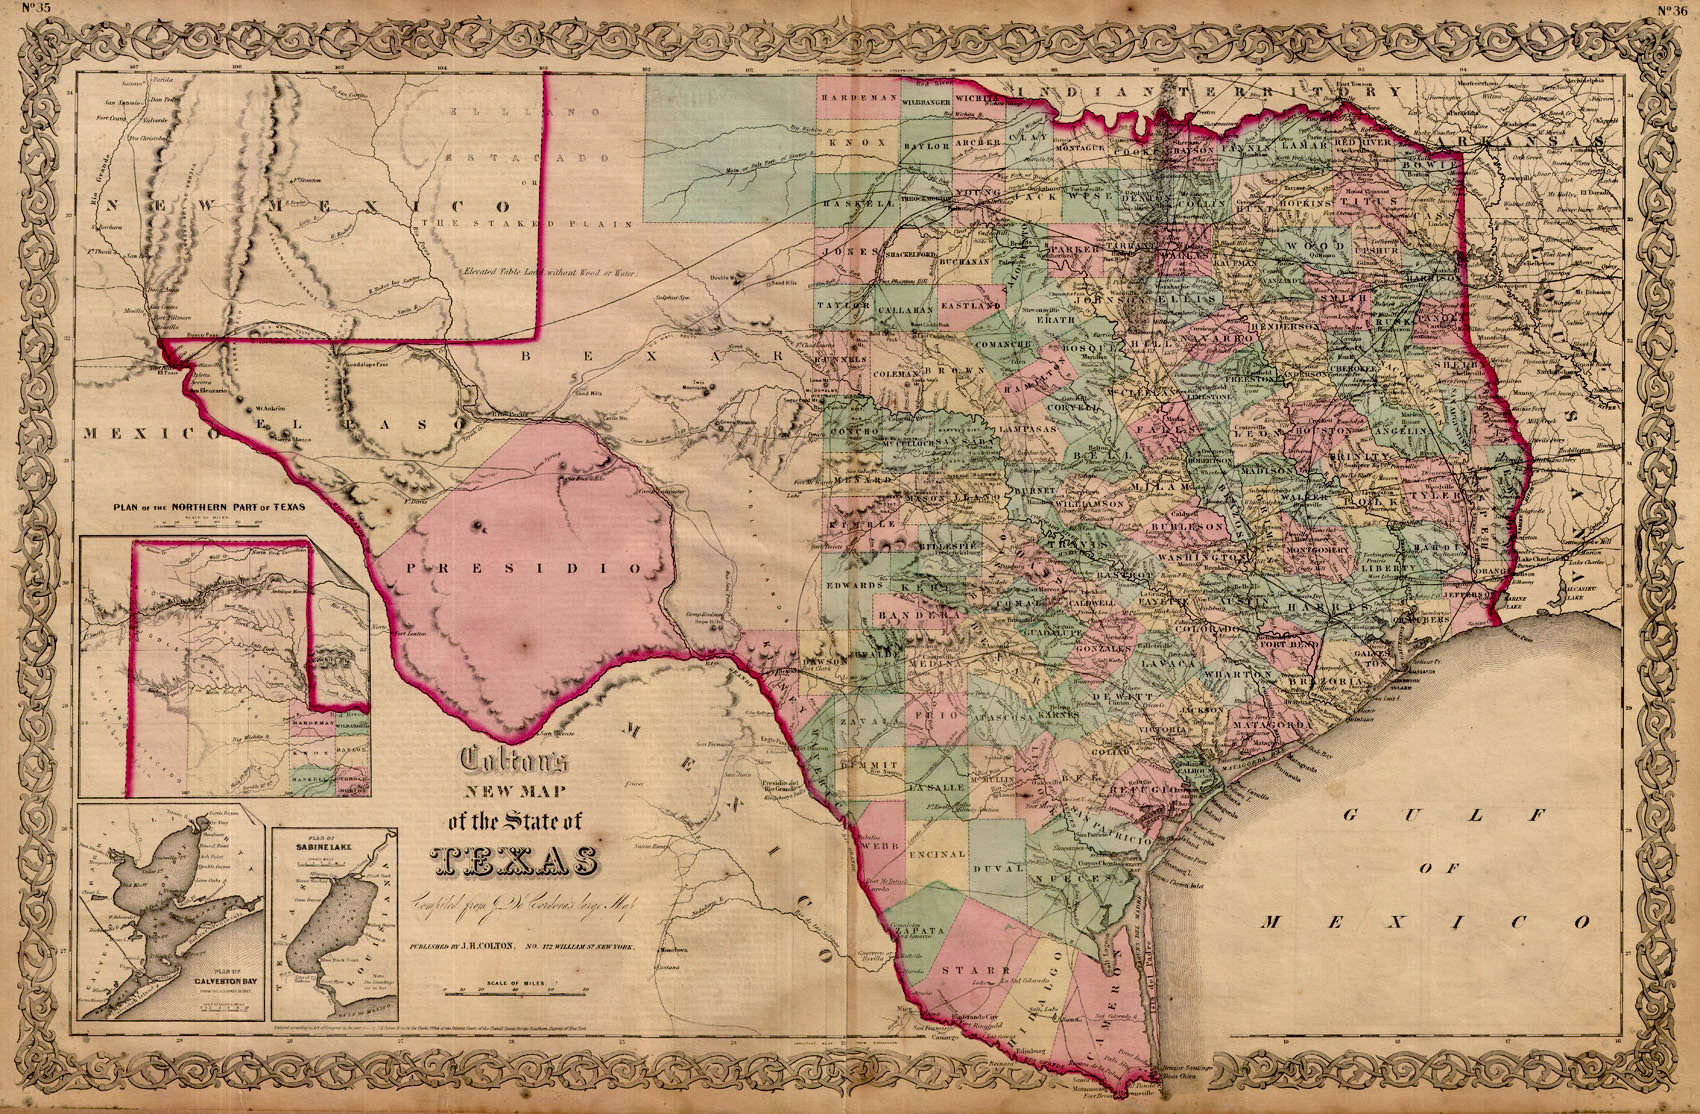 (TX.) Colton's New Map of the State of Texas